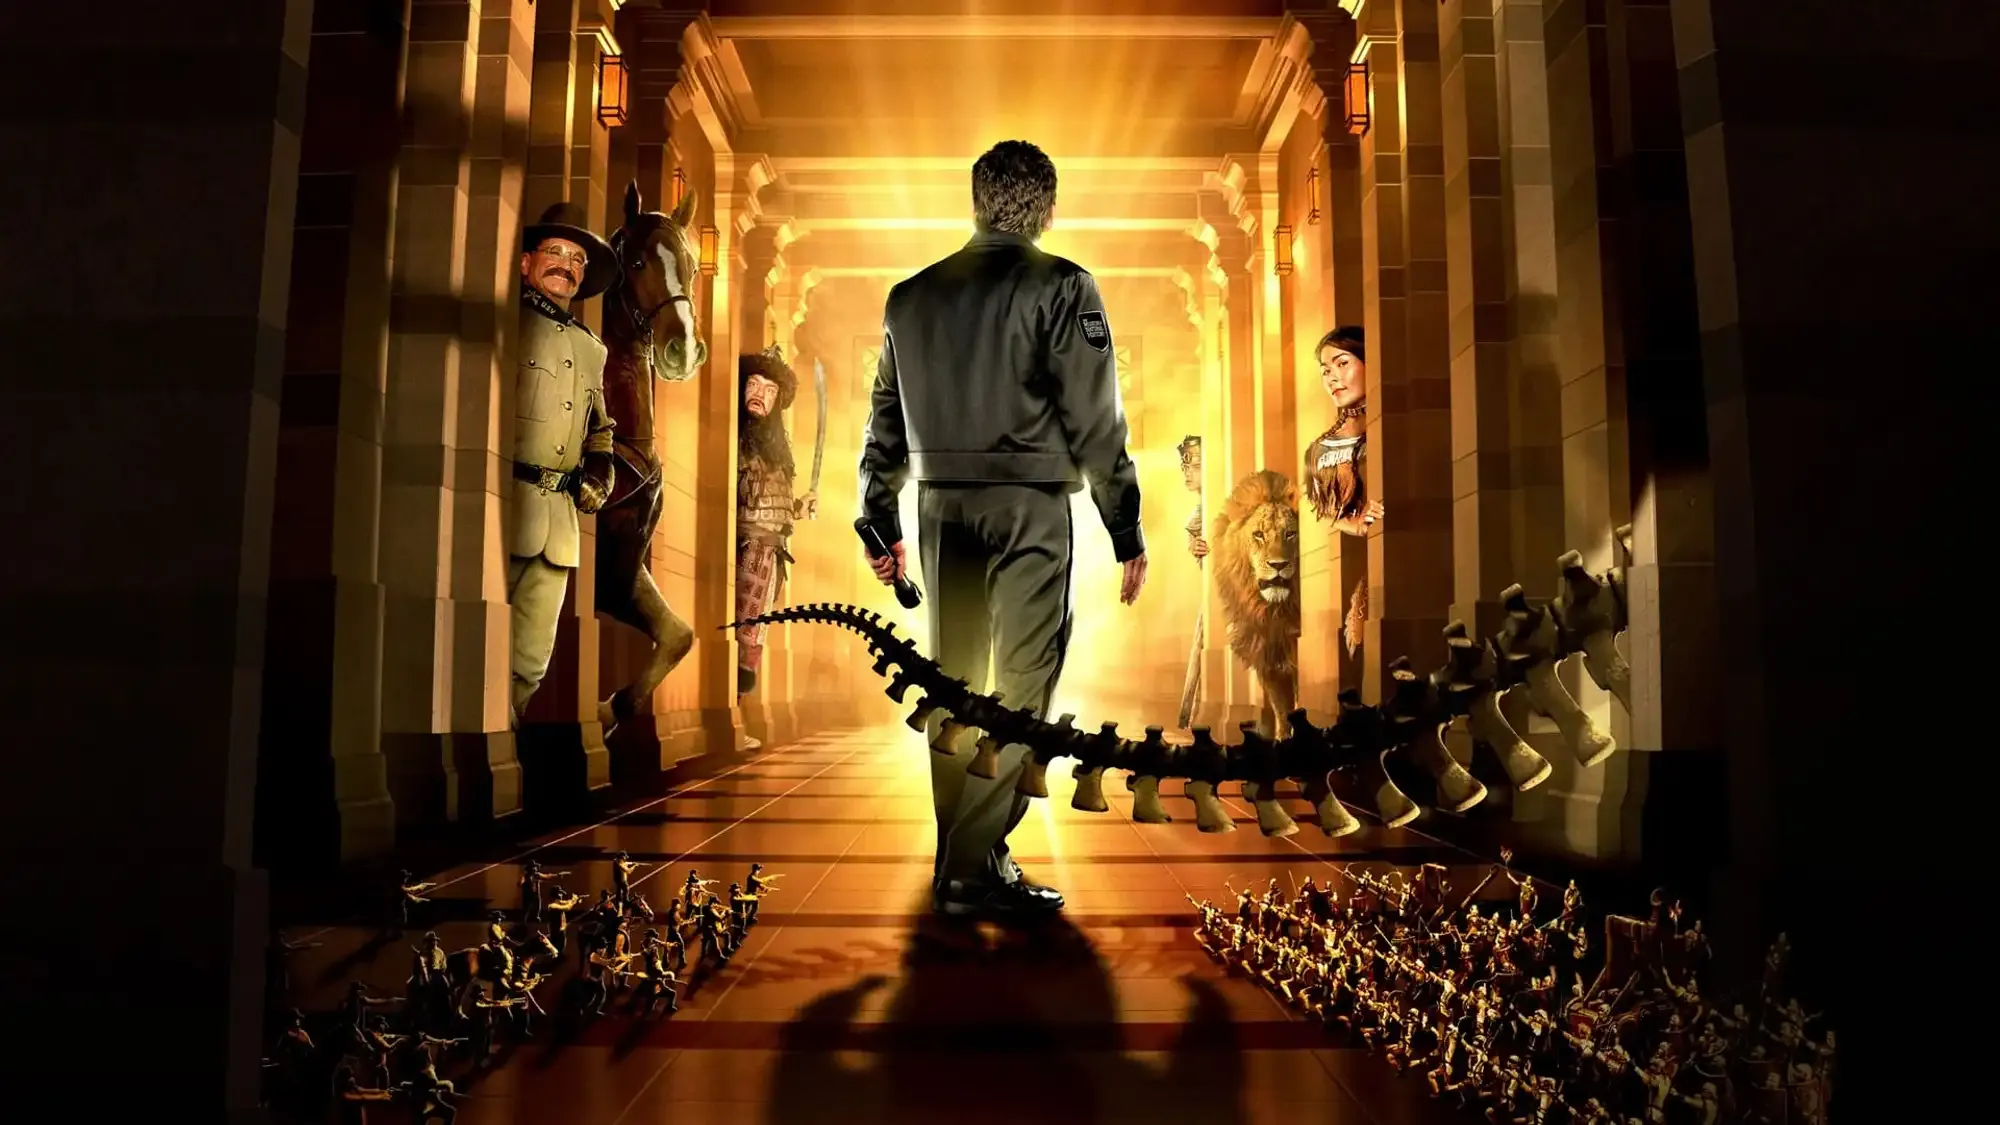 Night at the Museum movie review